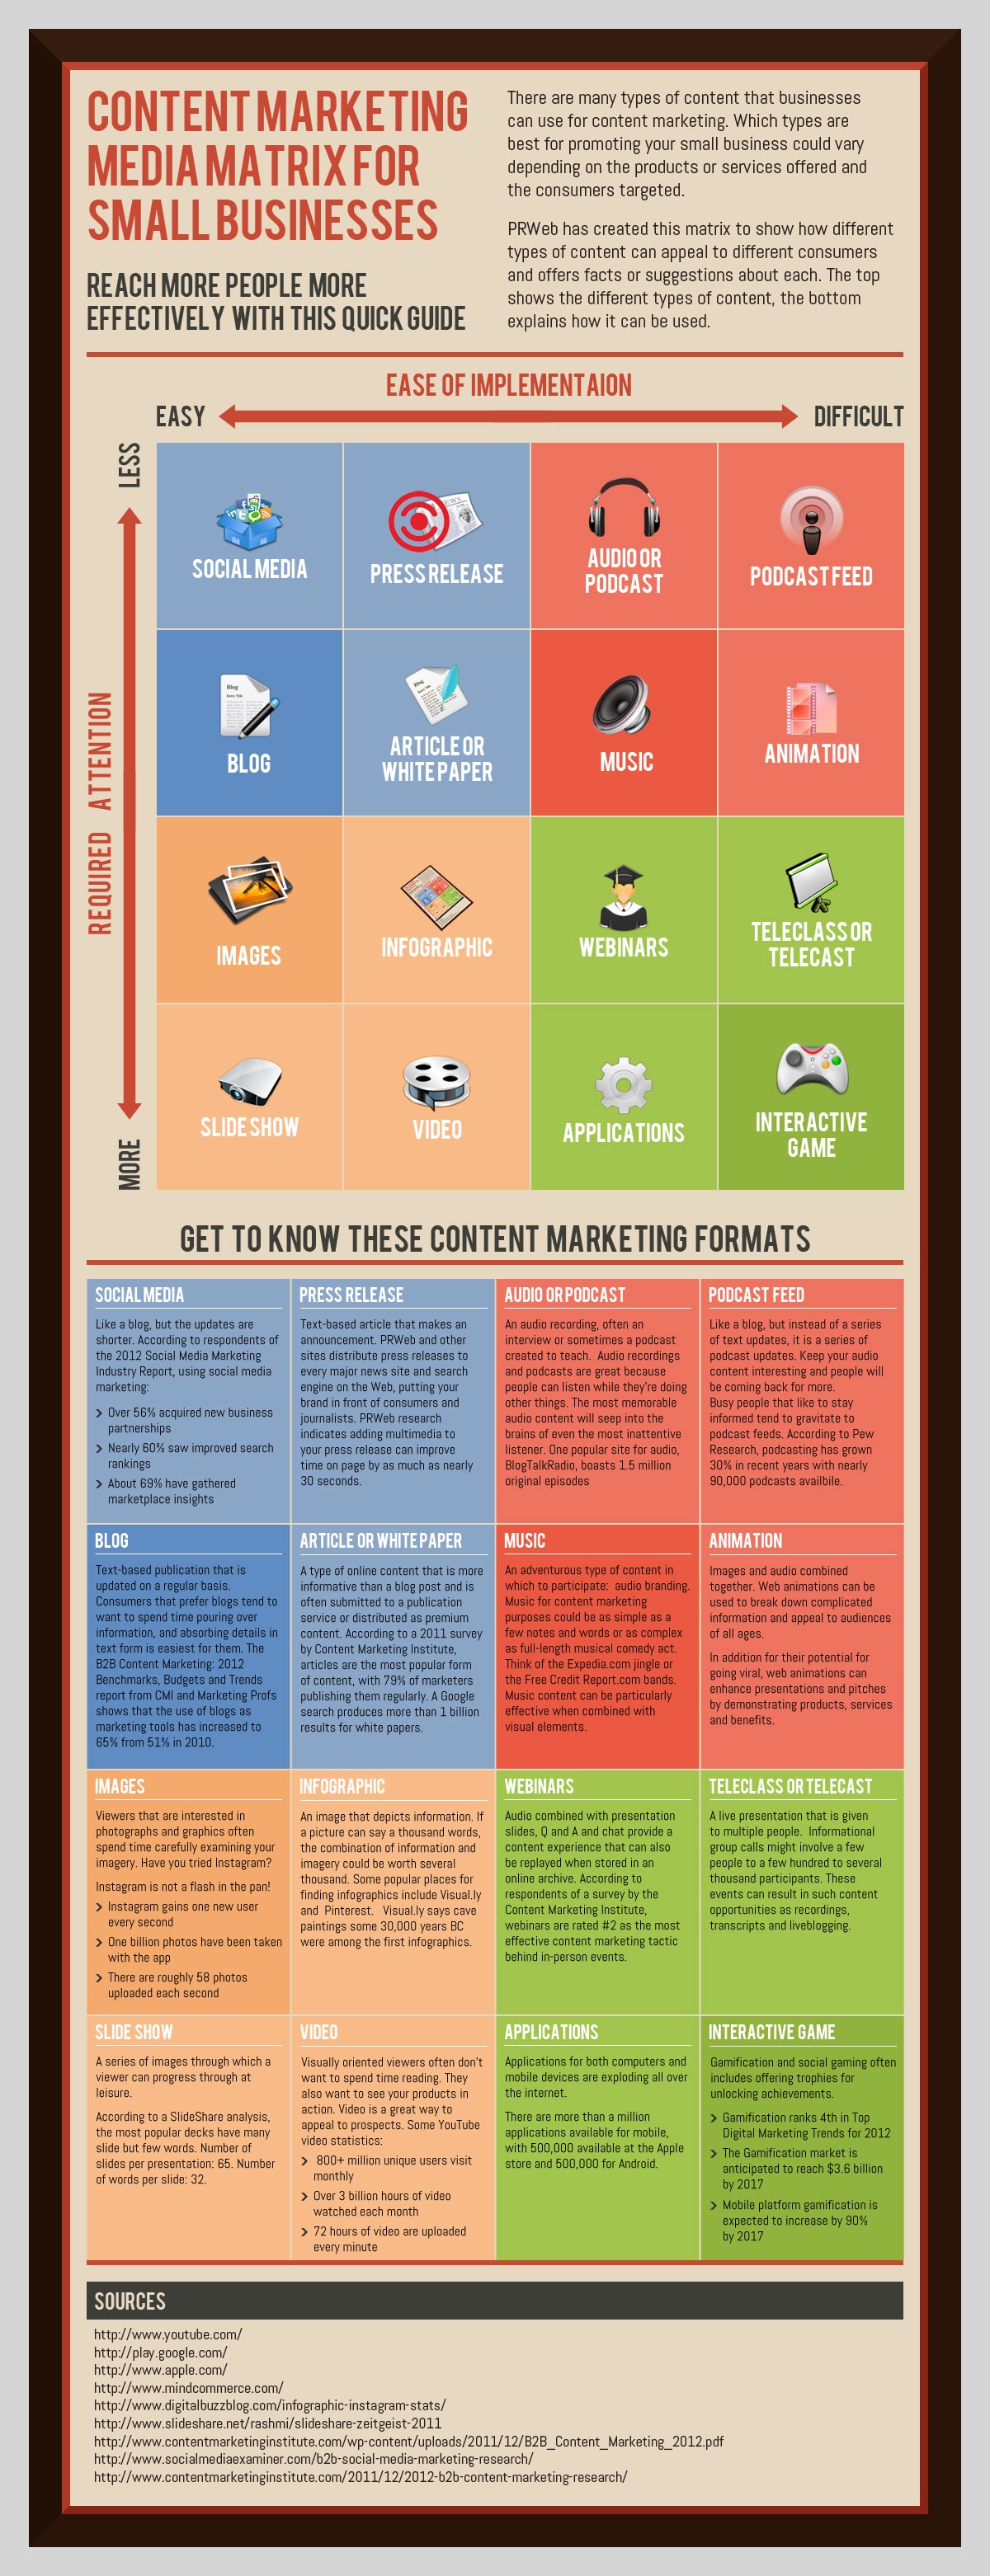 Marketing Content Media Guide For Small Businesses [Infographic]